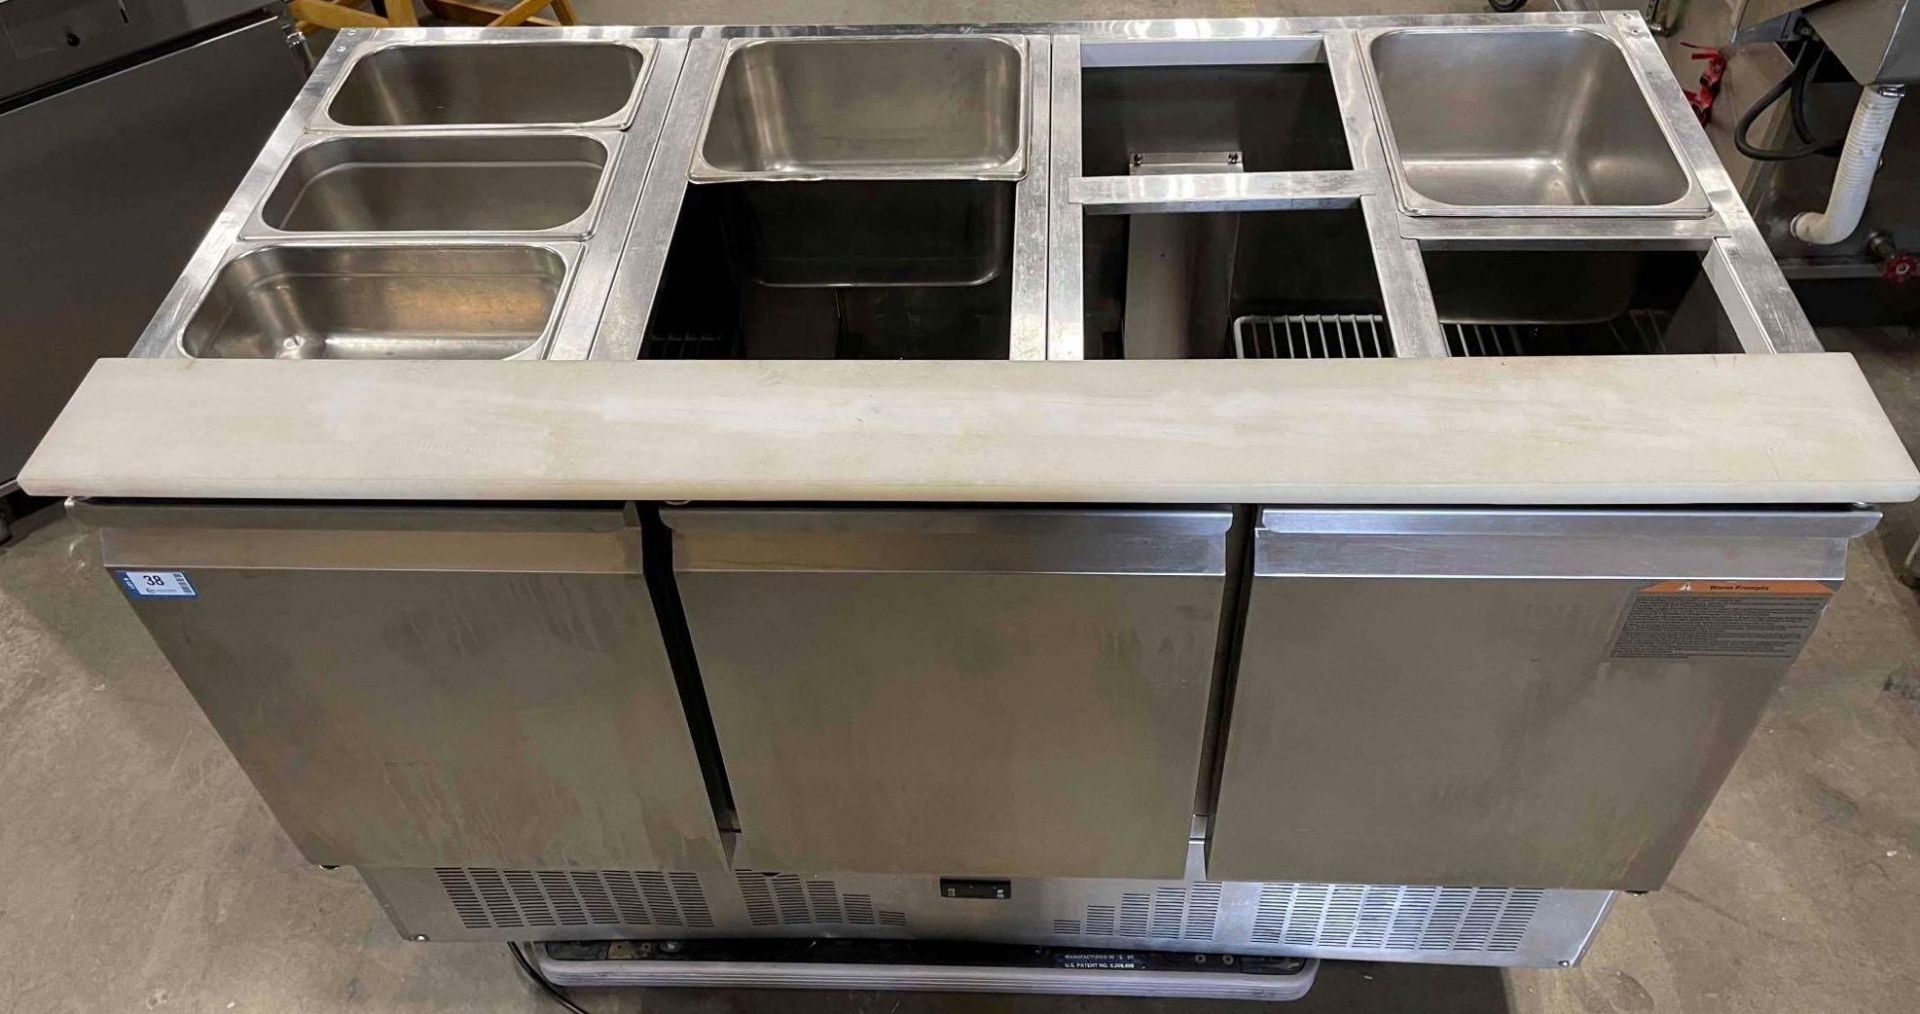 STAINLESS STEEL 3 DOOR REFRIGERATED PREP STATION W/ CUTTING BOARD - Image 9 of 9